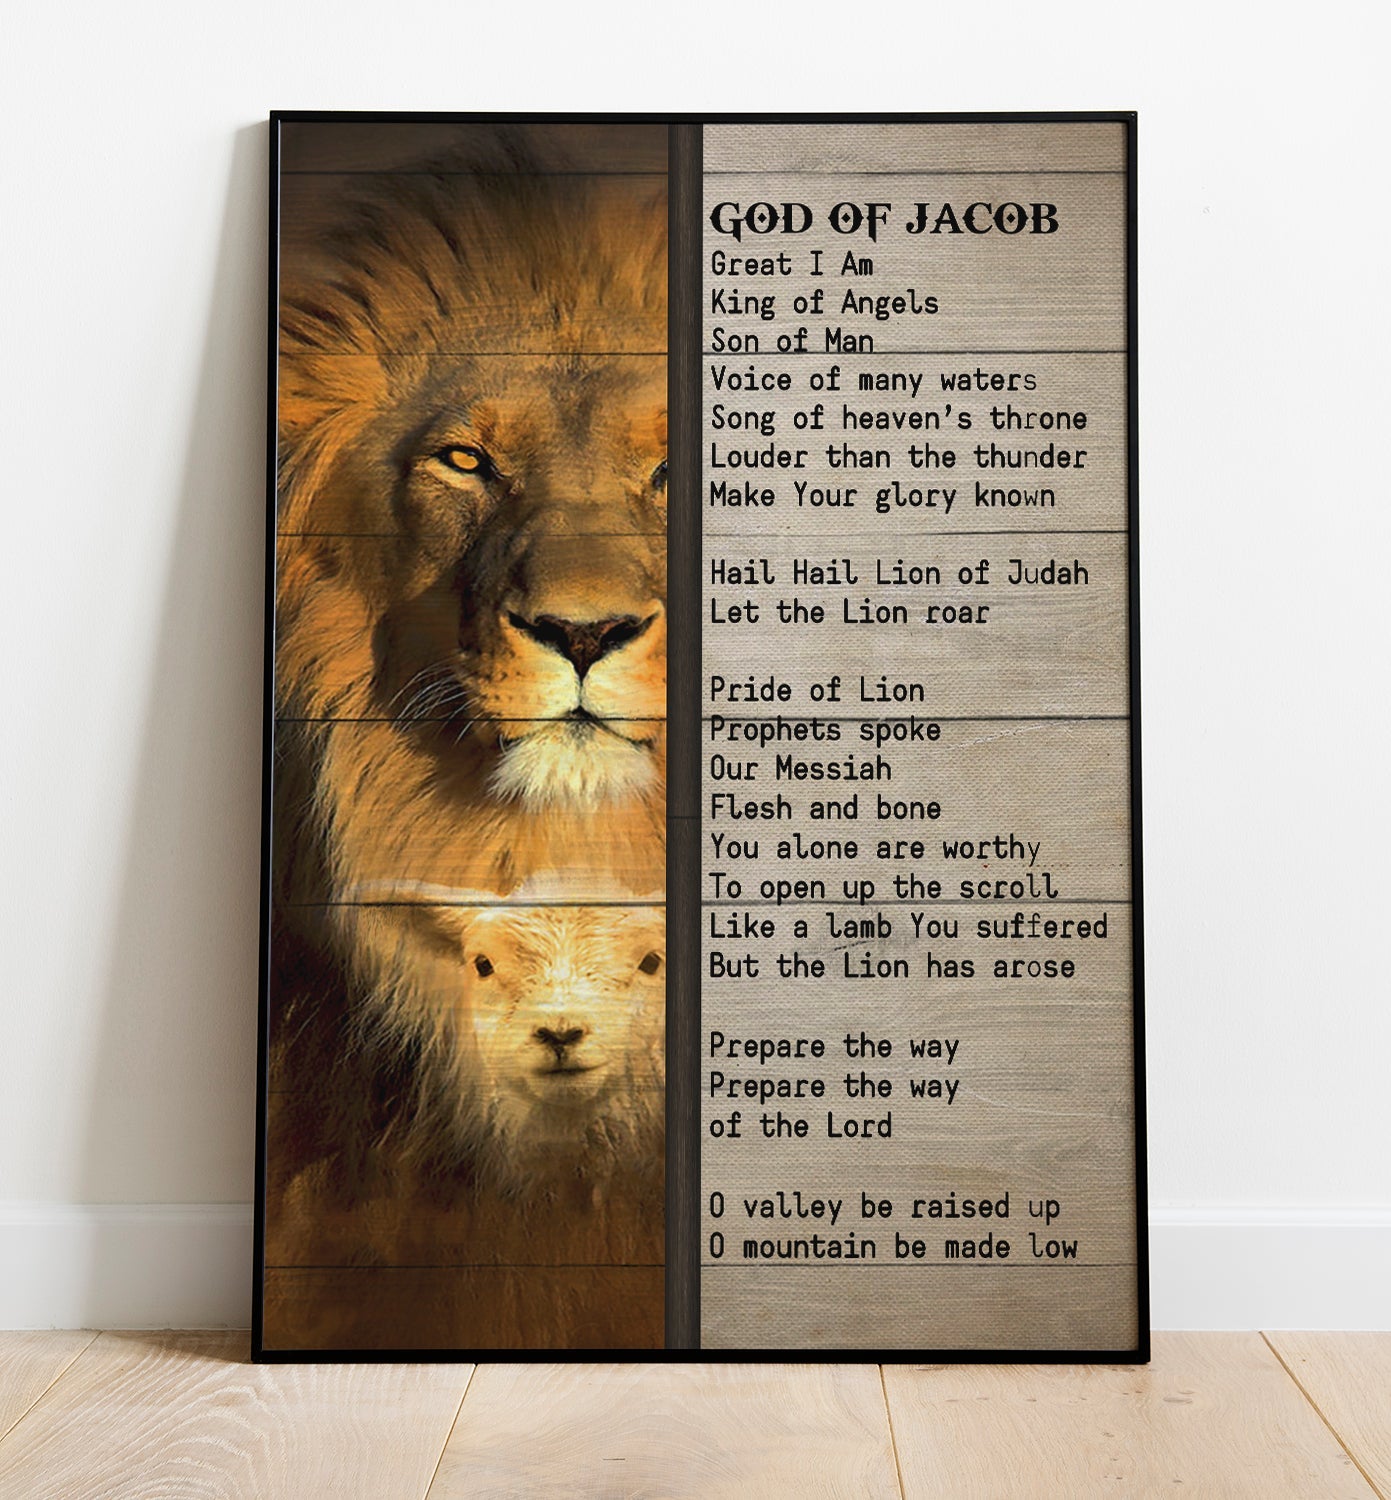 Lion's Roar - song and lyrics by Psalm